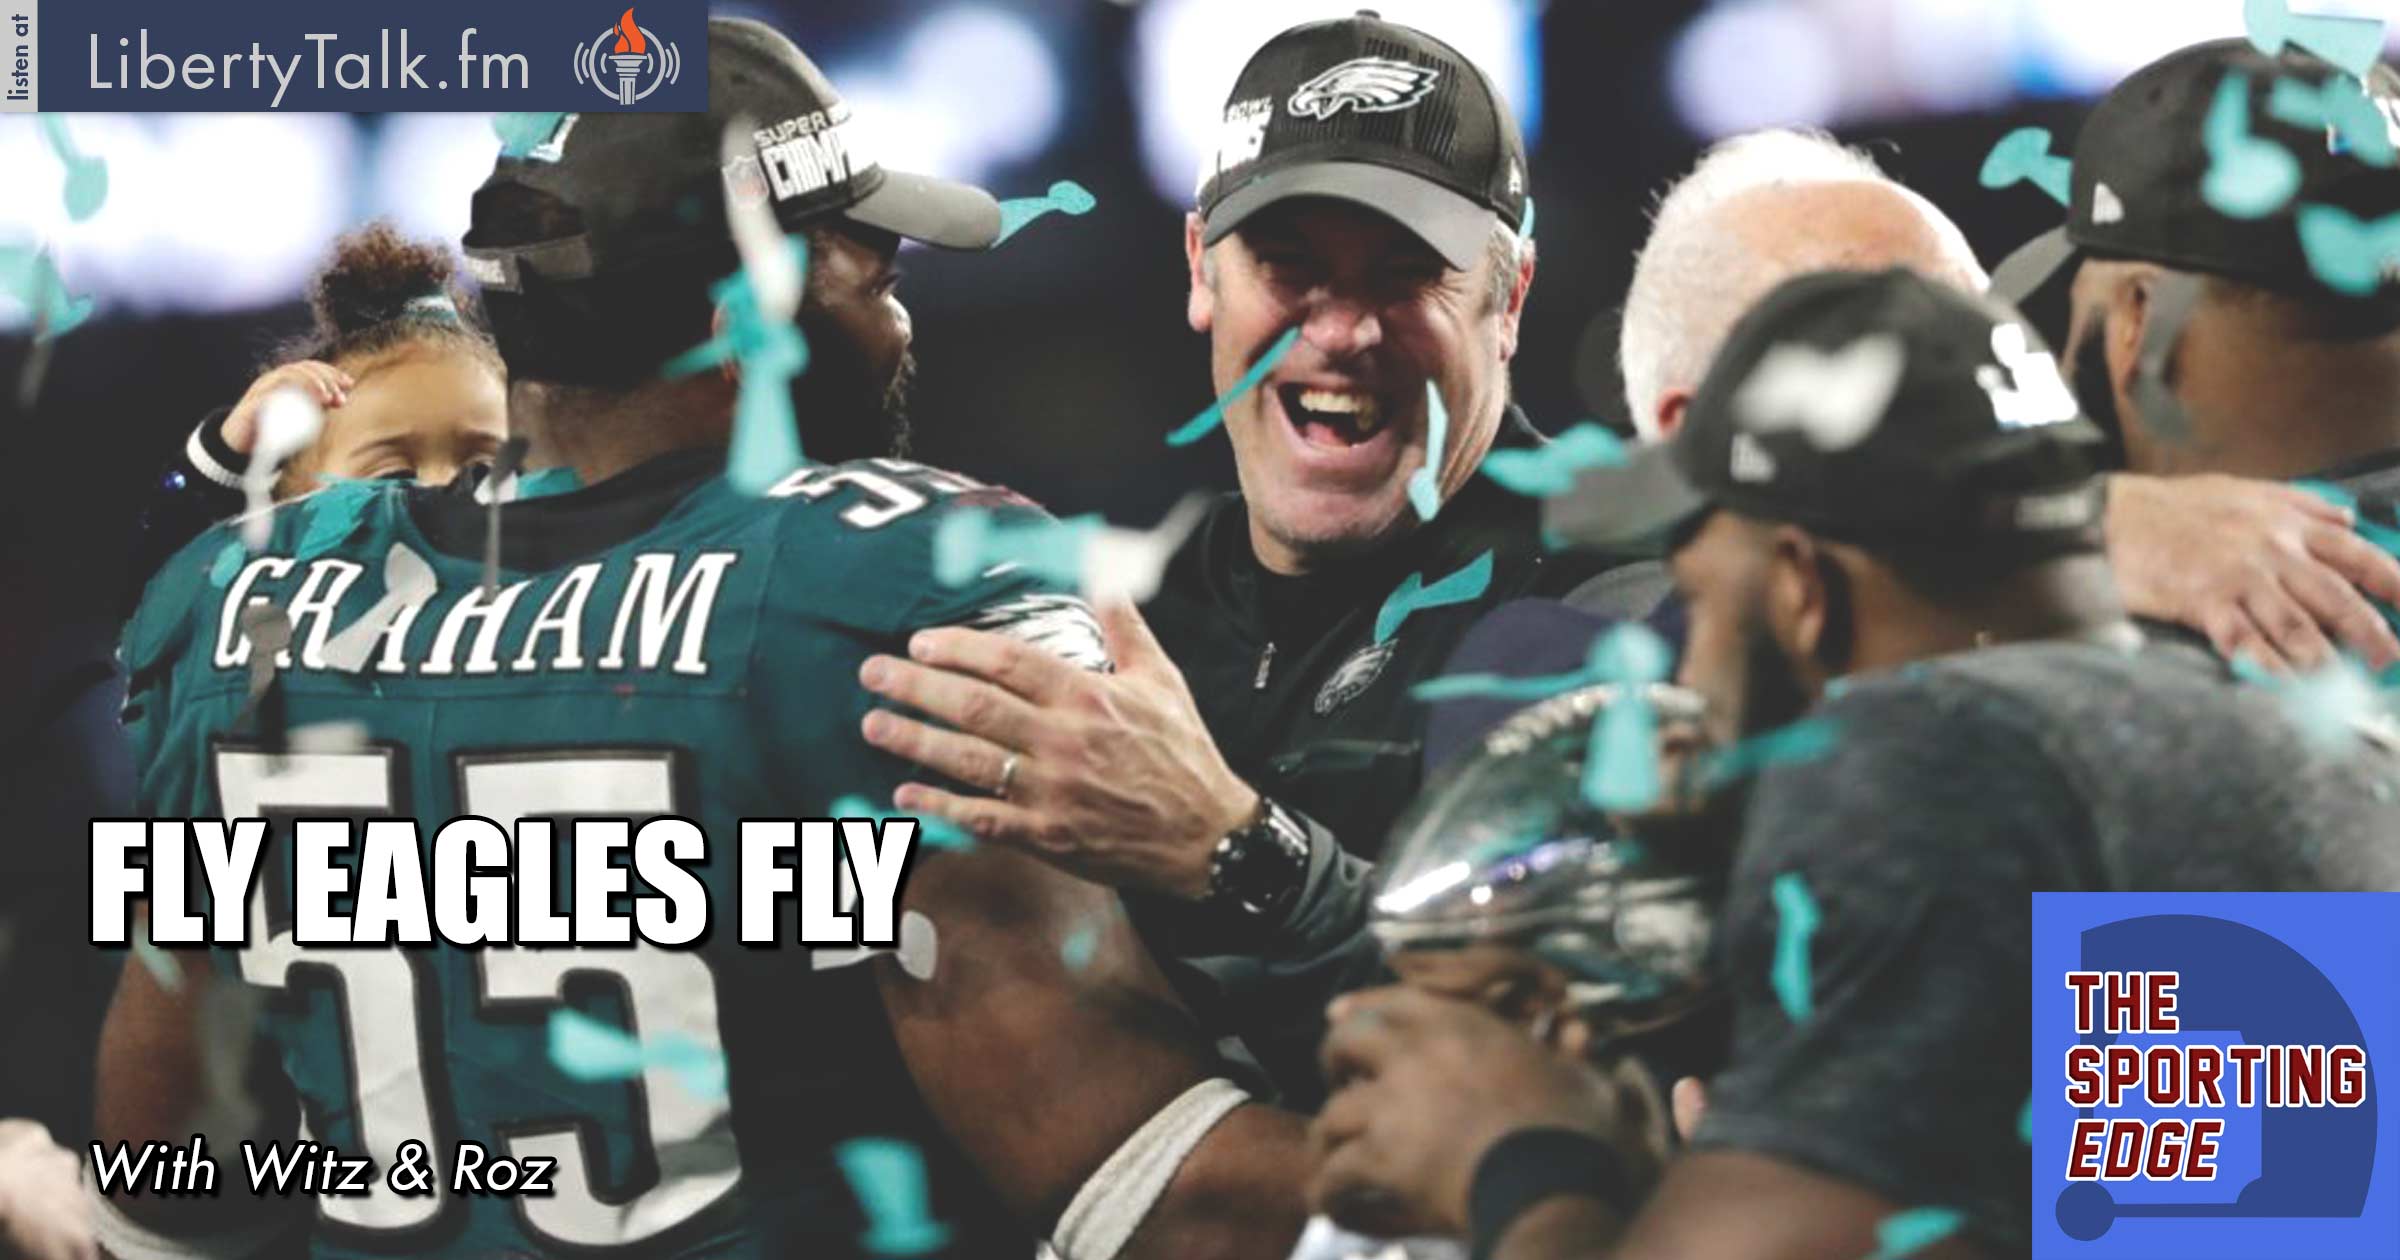 Fly Eagles Fly - The Sporting Edge